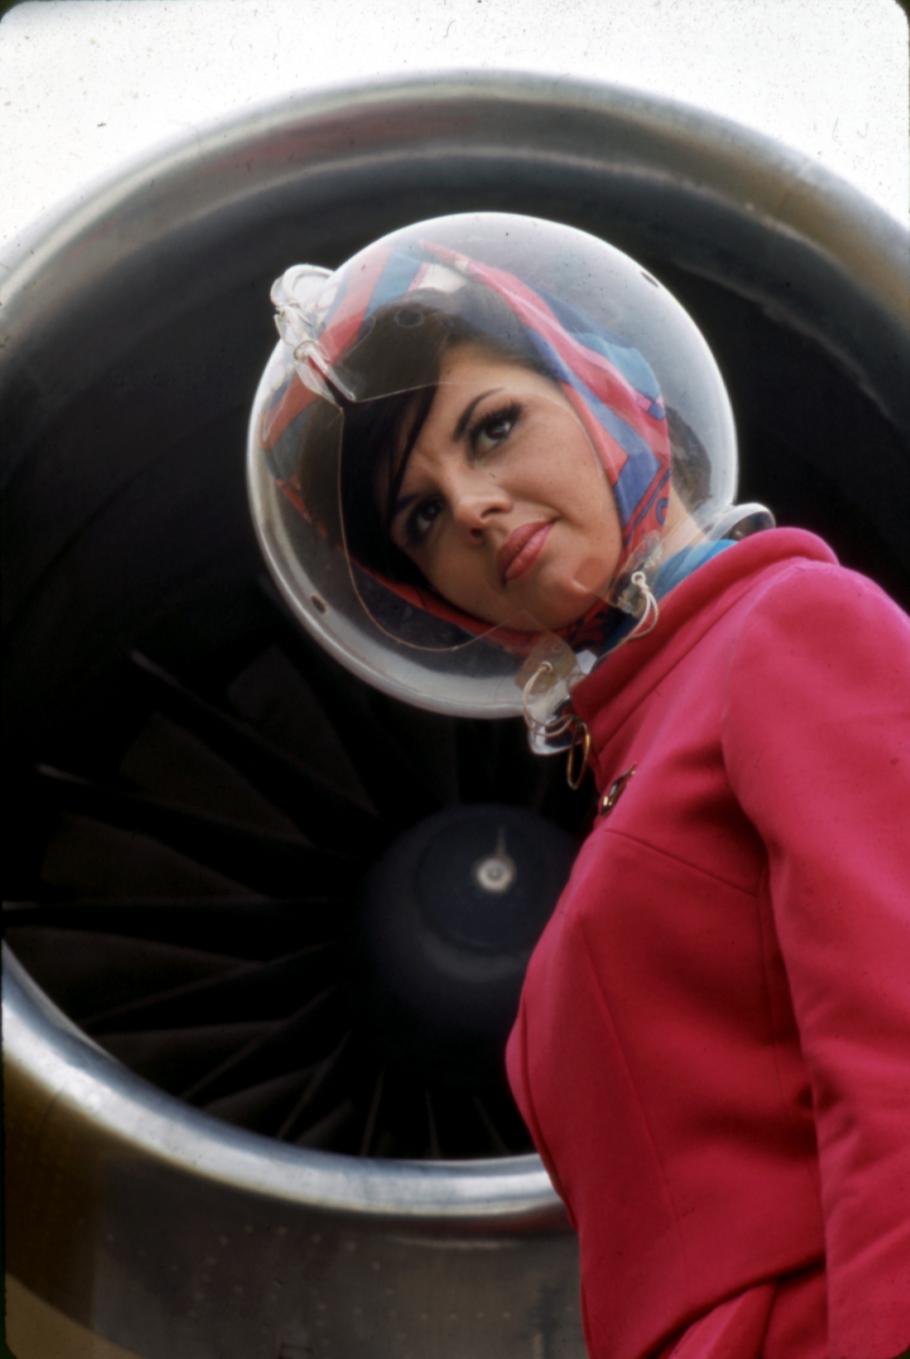 Side view of a flight attendant wearing a red flight uniform and a plastic, bubble-shaped helmet.